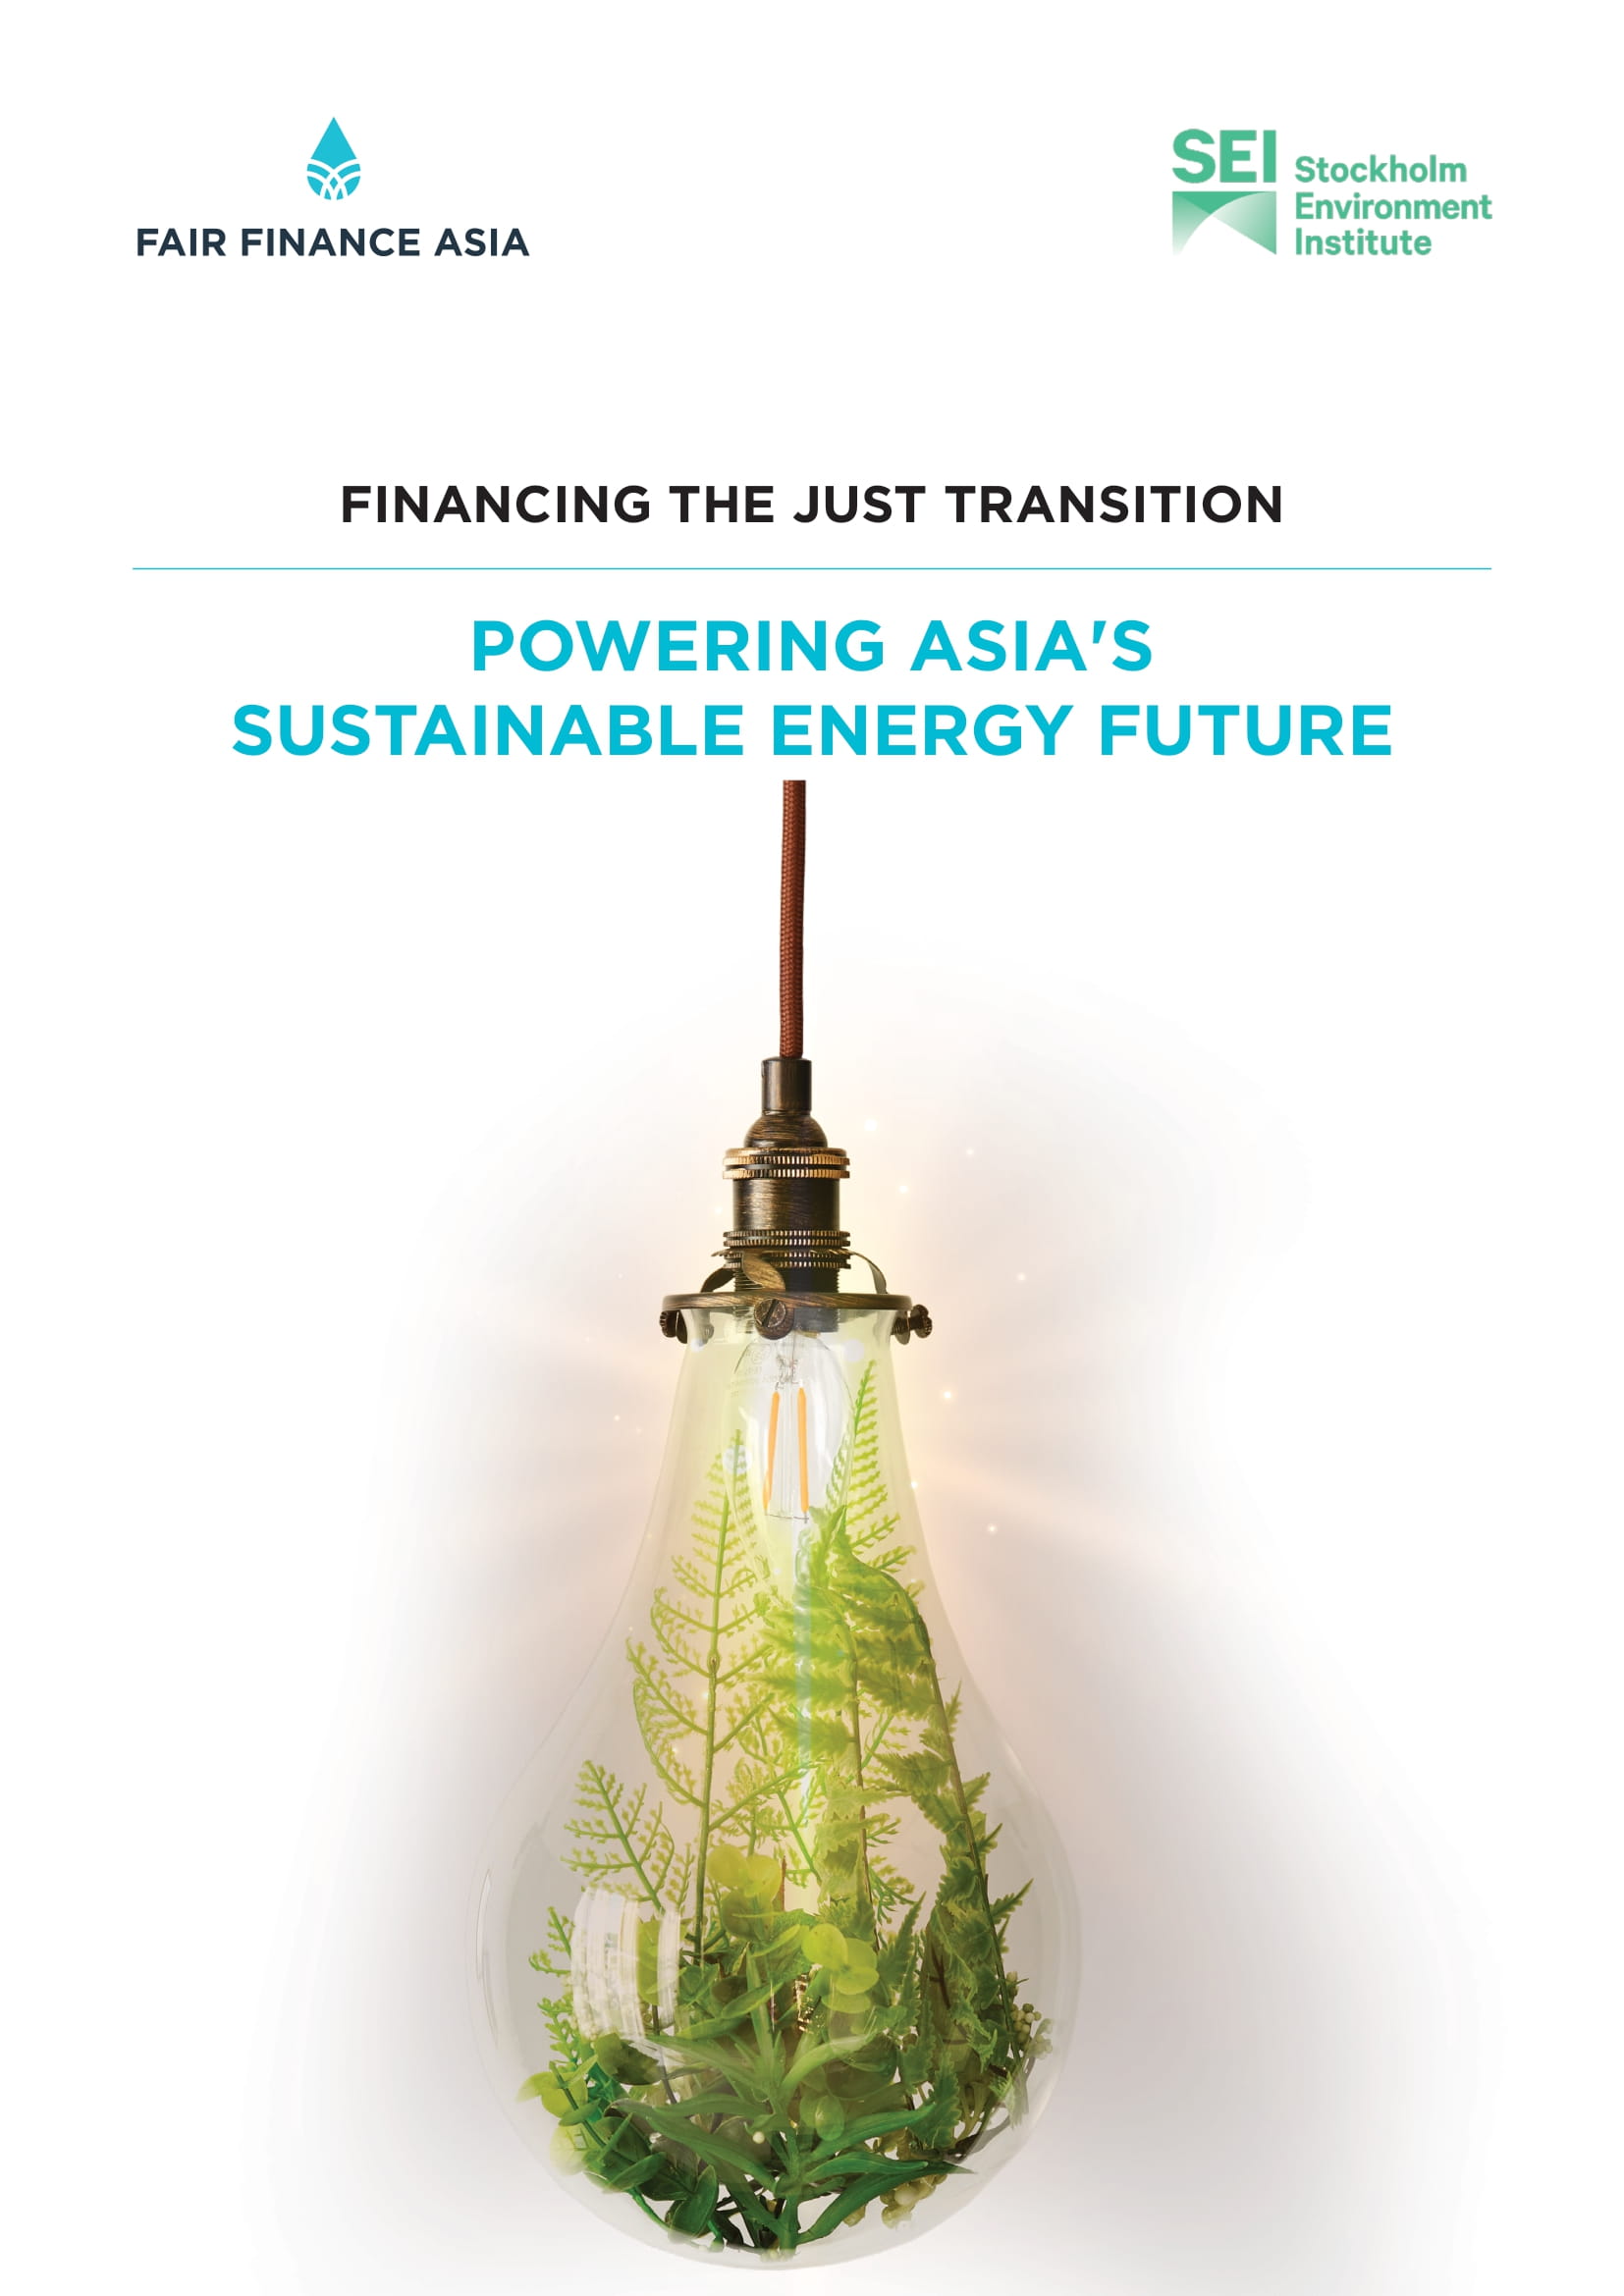 KEY FINDINGS AND OBSERVATIONS – “FINANCING THE JUST TRANSITION: POWERING ASIA’S SUSTAINABILITY ENERGY FUTURE”